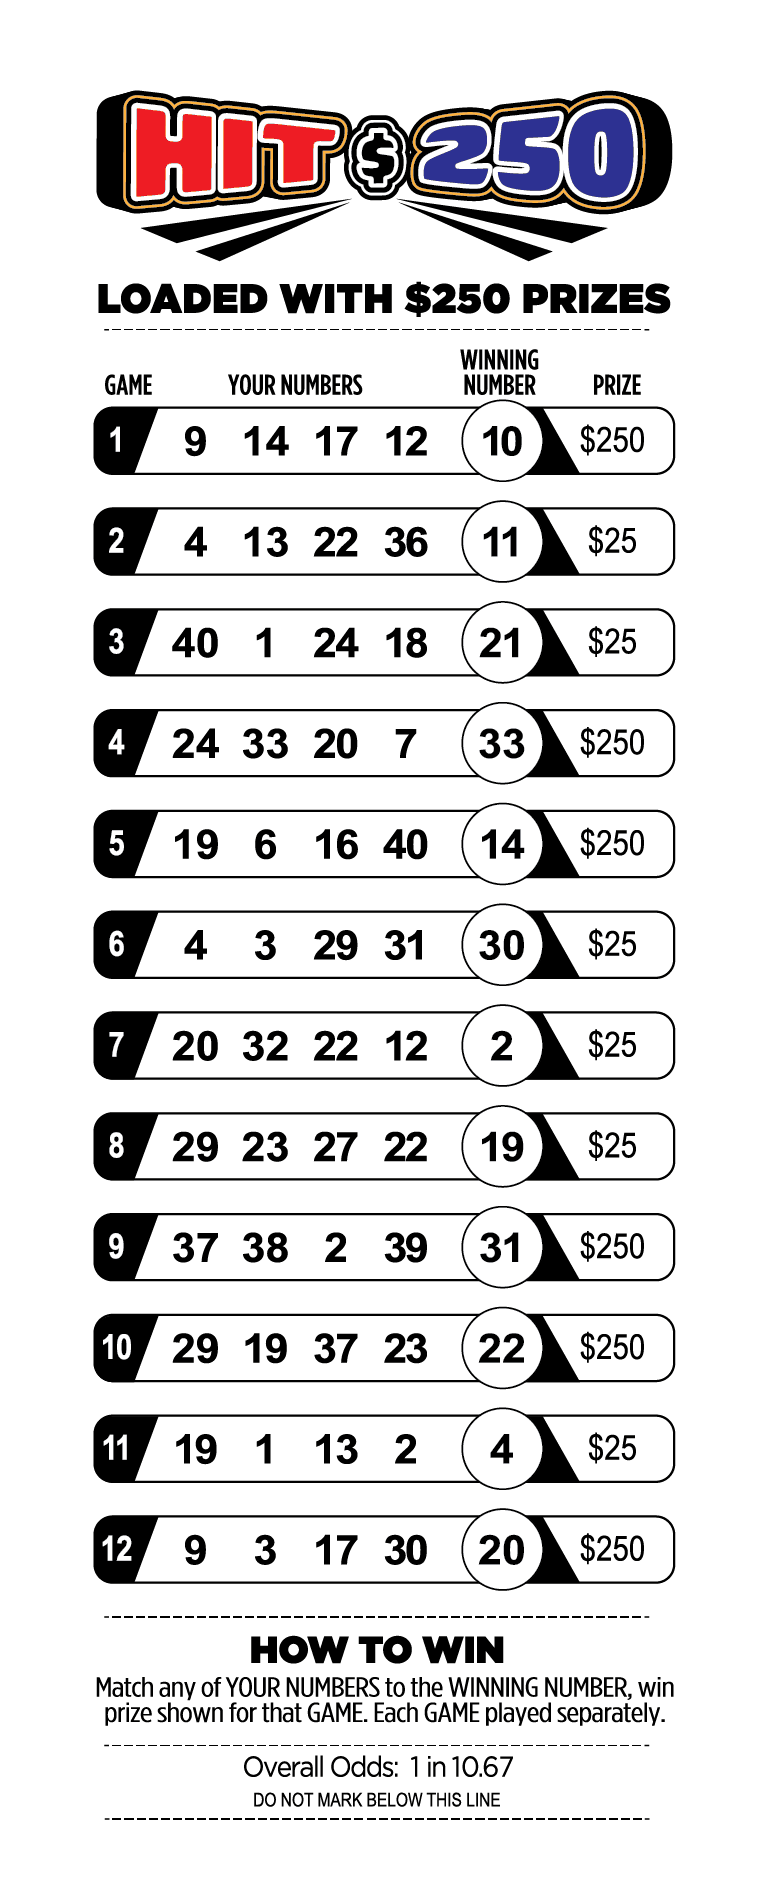 lotto prize for 3 numbers plus bonus ball